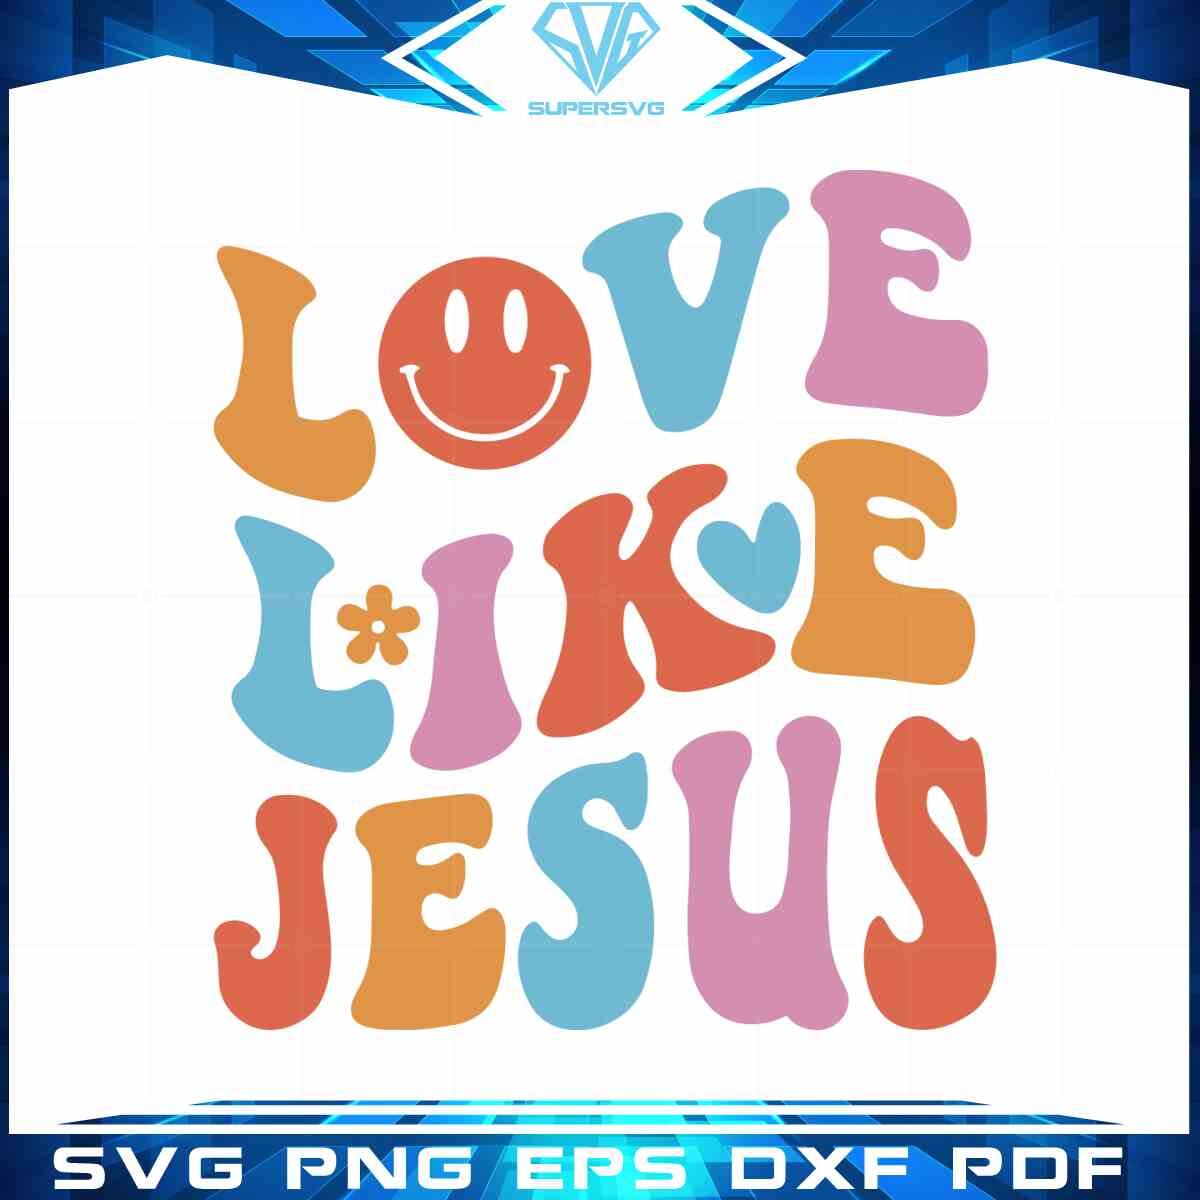 jusus-christian-love-vector-design-svg-cutting-file